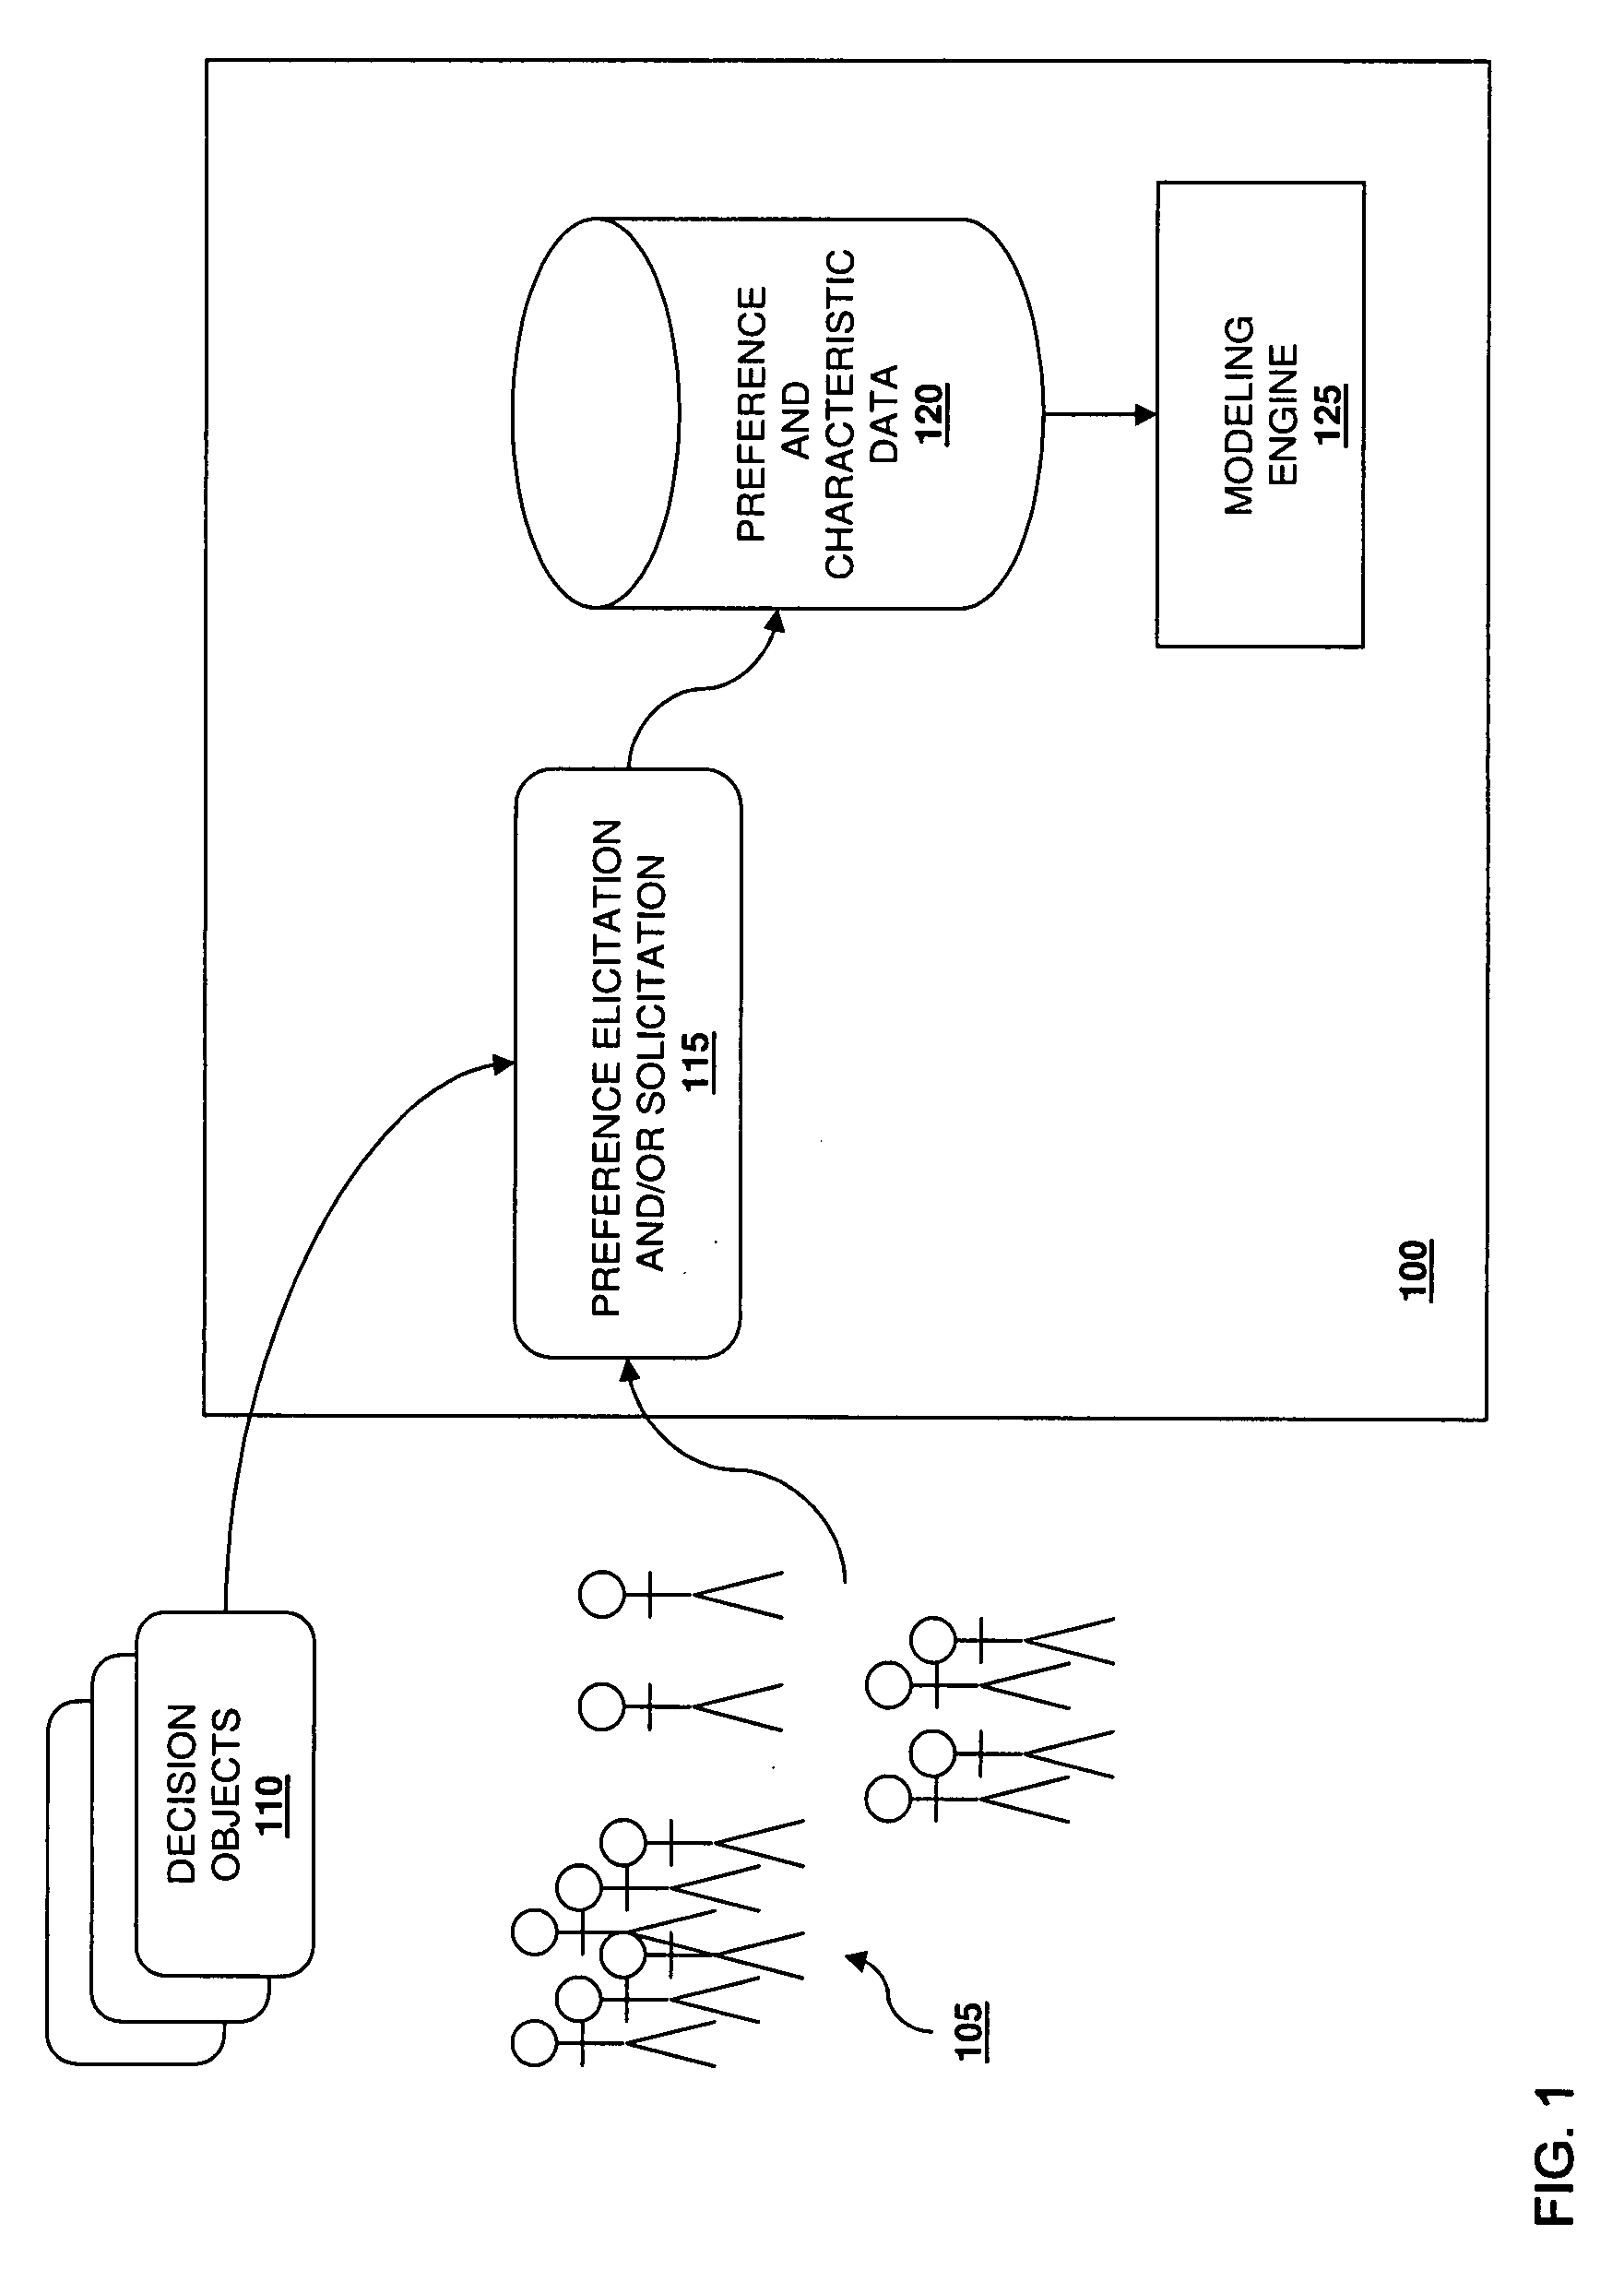 Method and System for Predicting Personal Preferences